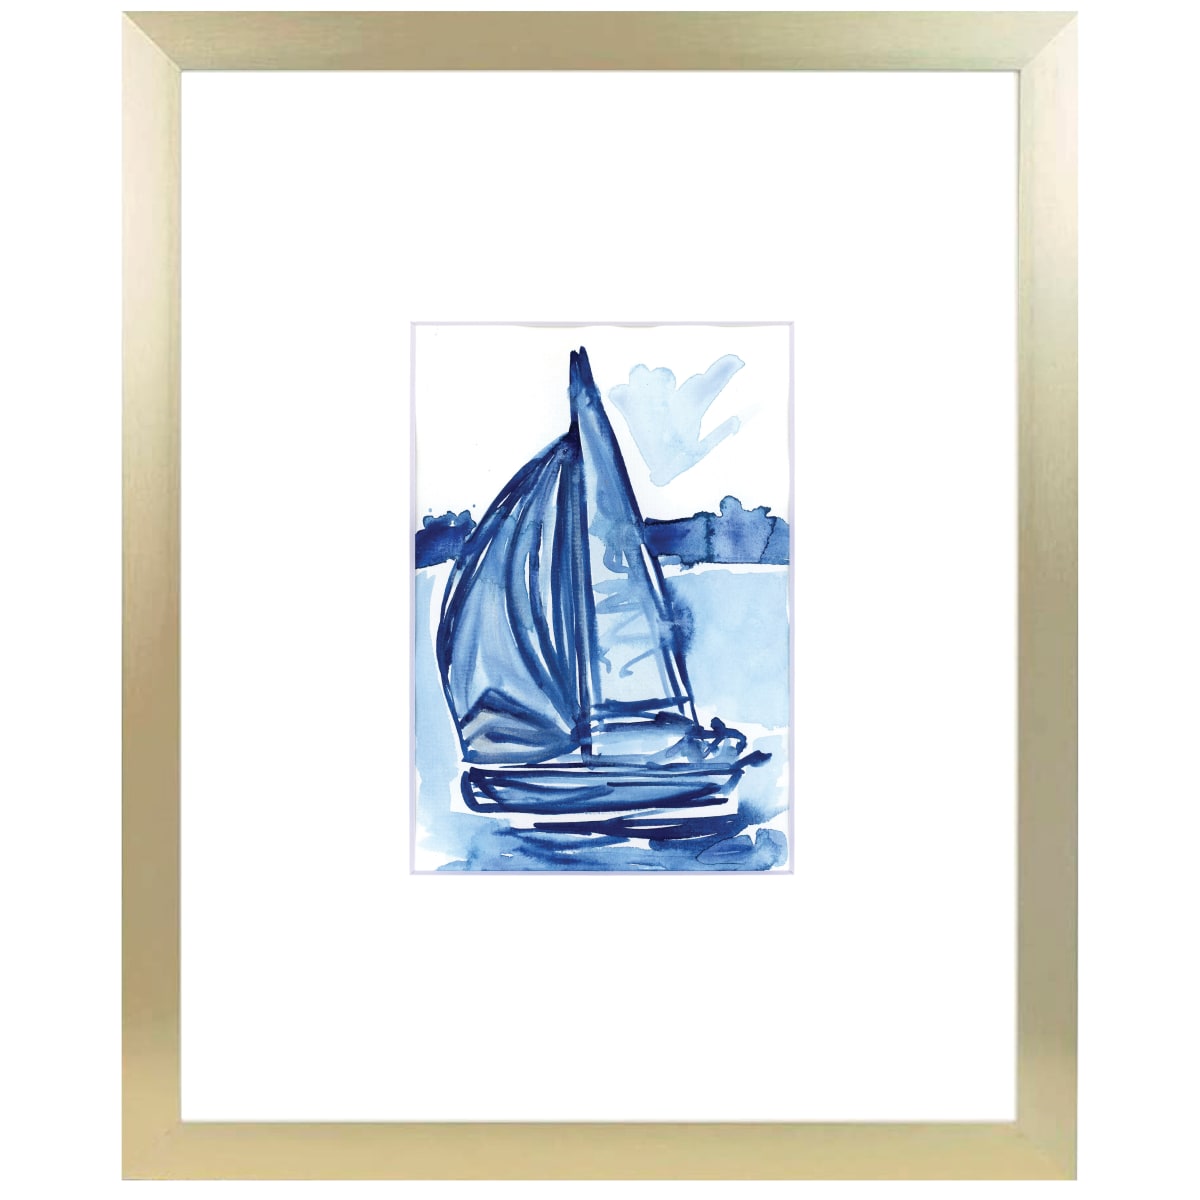 "We often forget we can learn almost anything" by JJ Hogan  Image: Nautical watercolor (gold shimmery frame, showcased with oversized mat under glass).